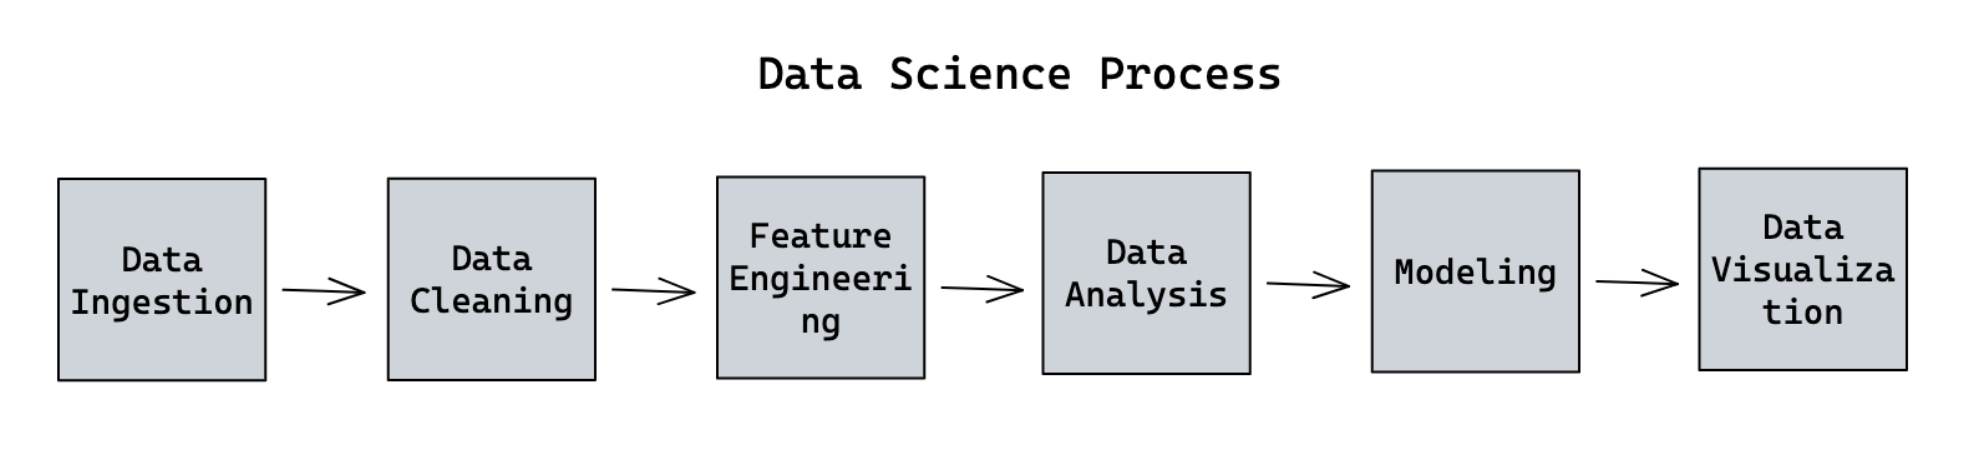 Data science process Justine Pascual